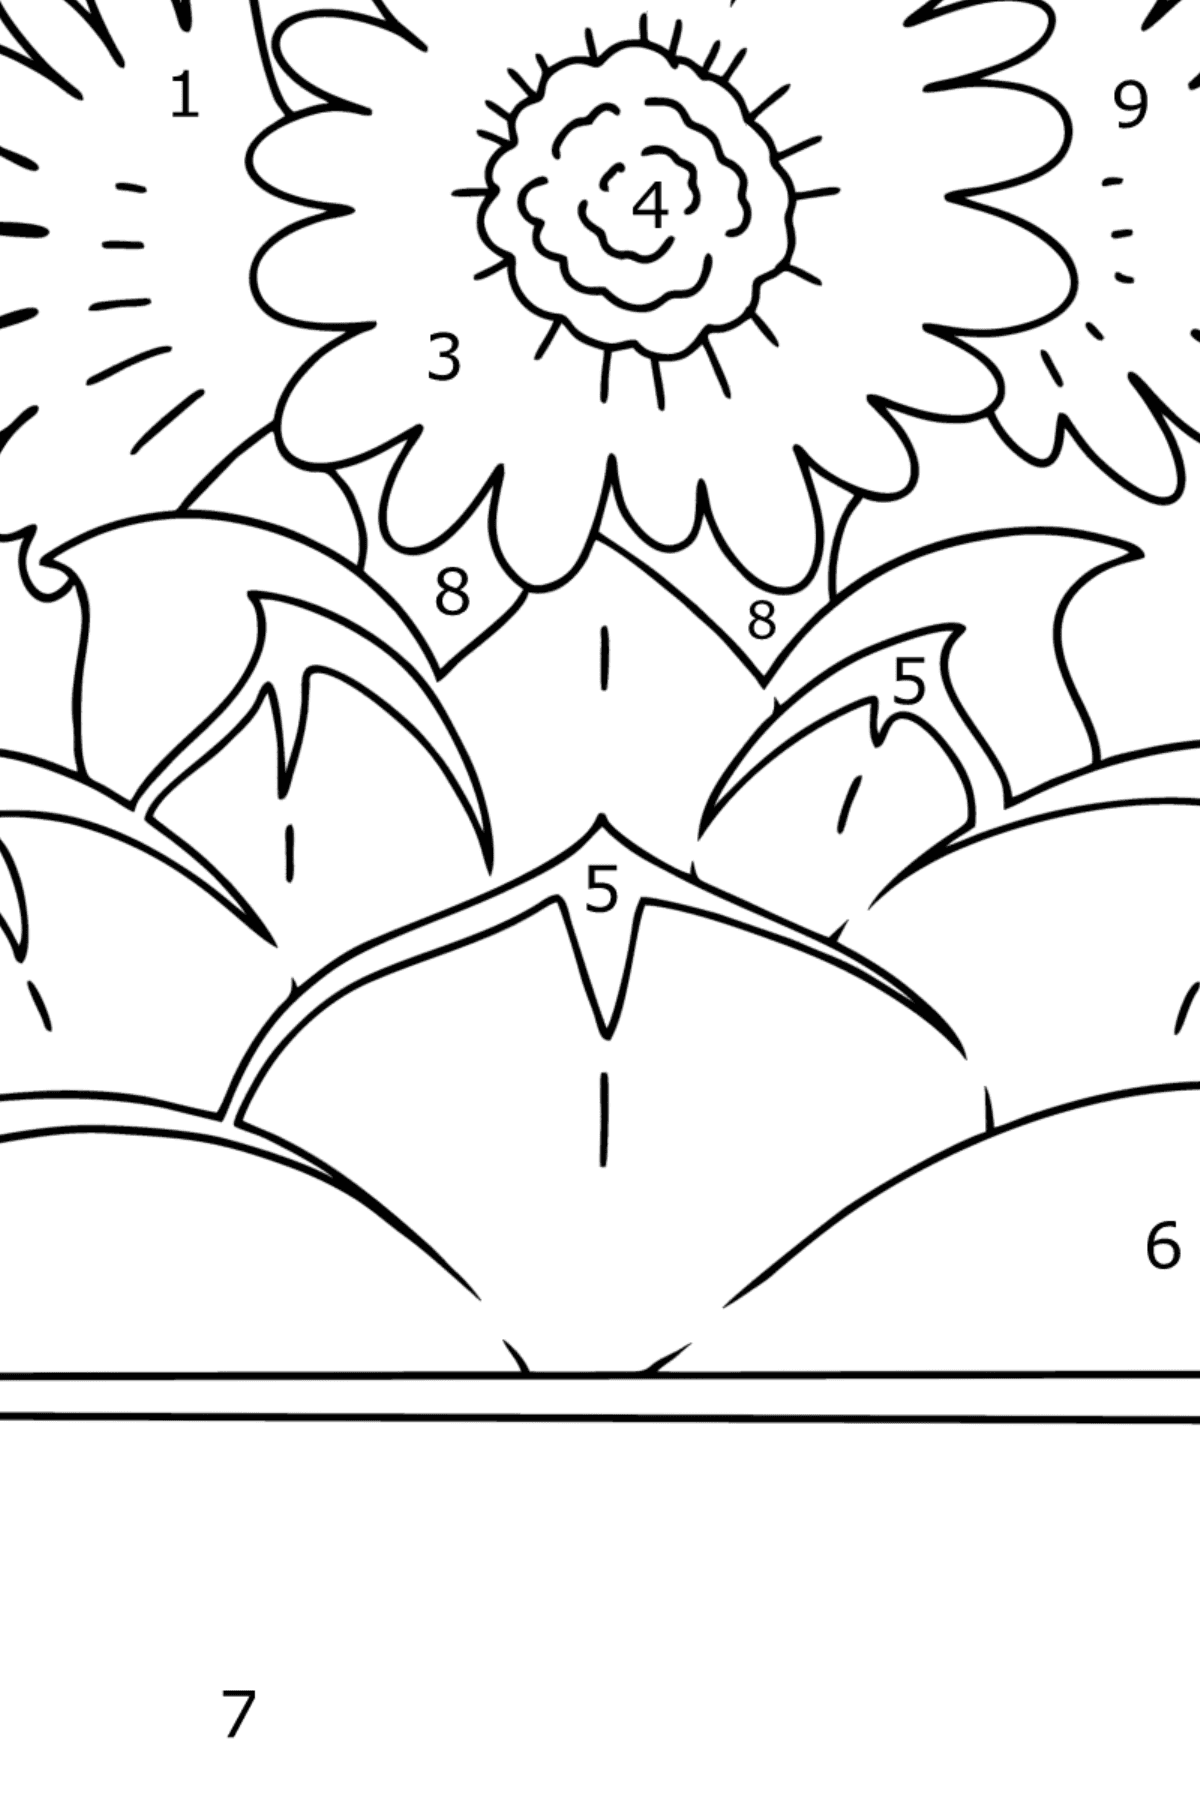 Echinocactus Grusonii coloring page - Coloring by Numbers for Kids